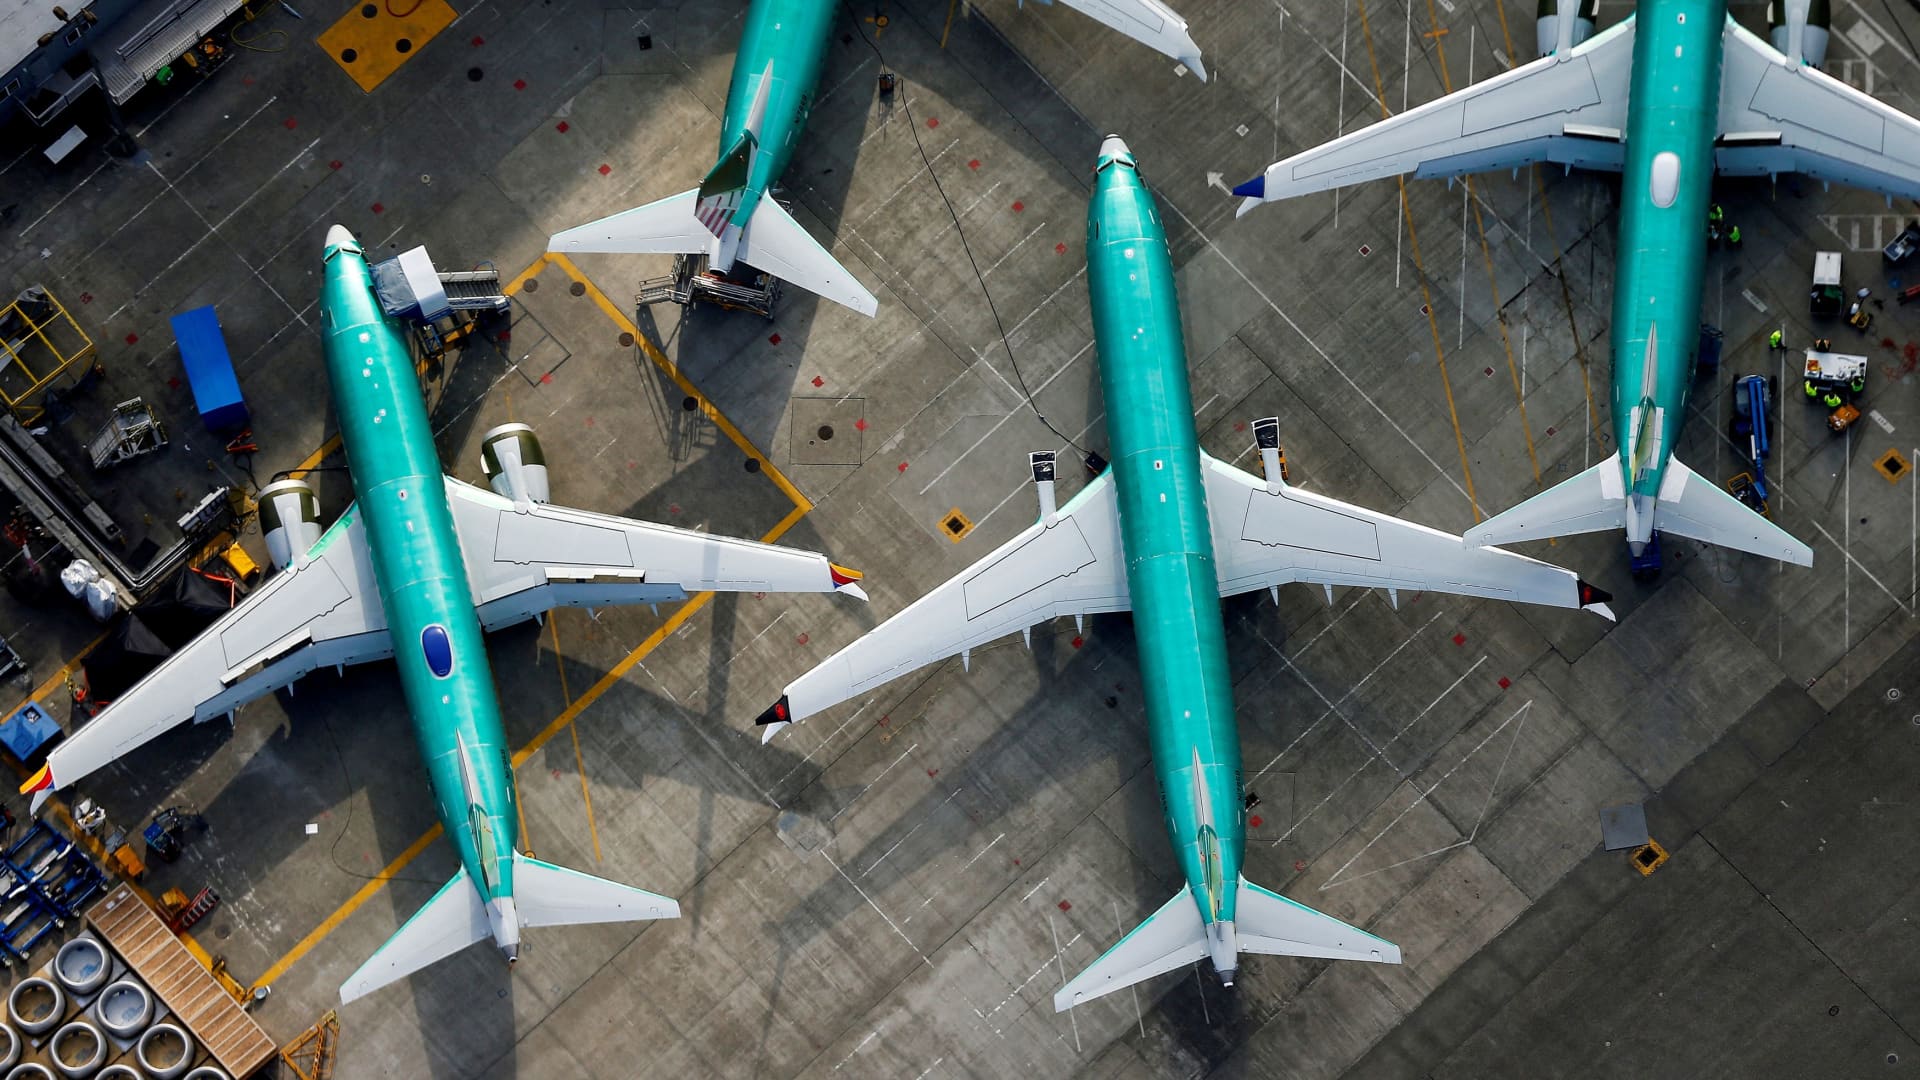 FAA gives Boeing 90 days to come up with quality control plan after 737 Max accident